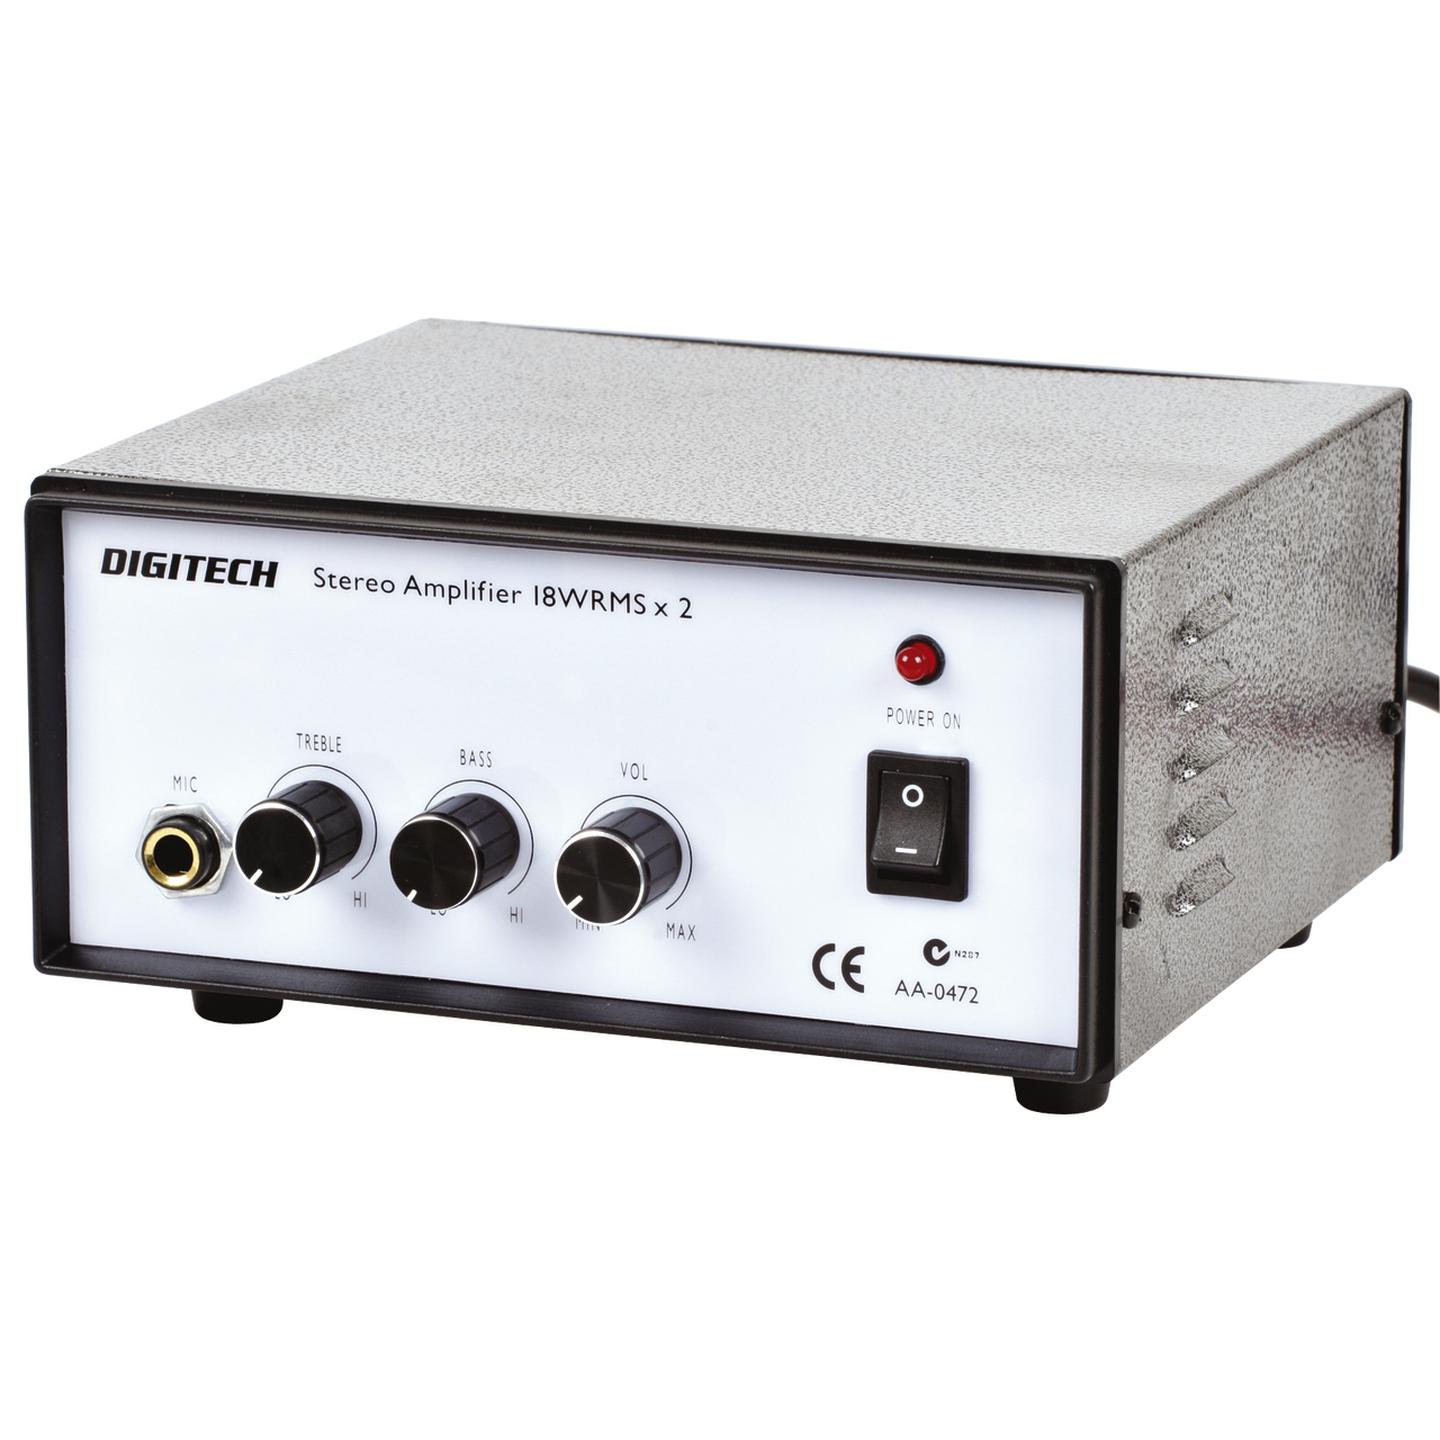 Digitech Low Cost Mains Powered Stereo Amplifier